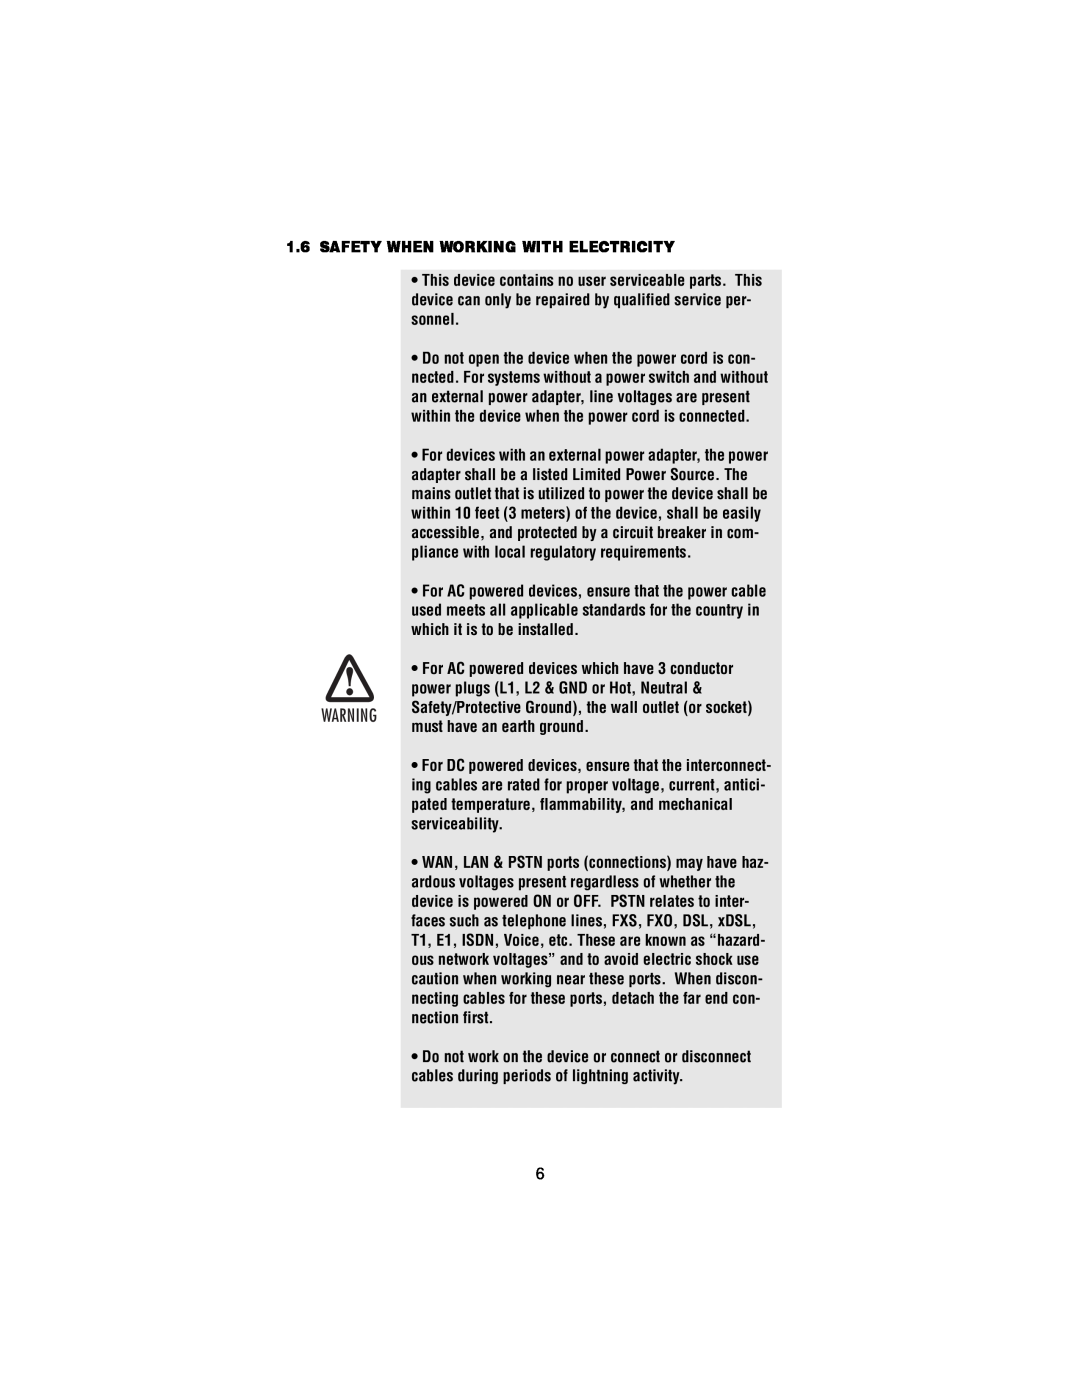 Patton electronic 2174 user manual Safety When Working With Electricity, For AC powered devices which have 3 conductor 